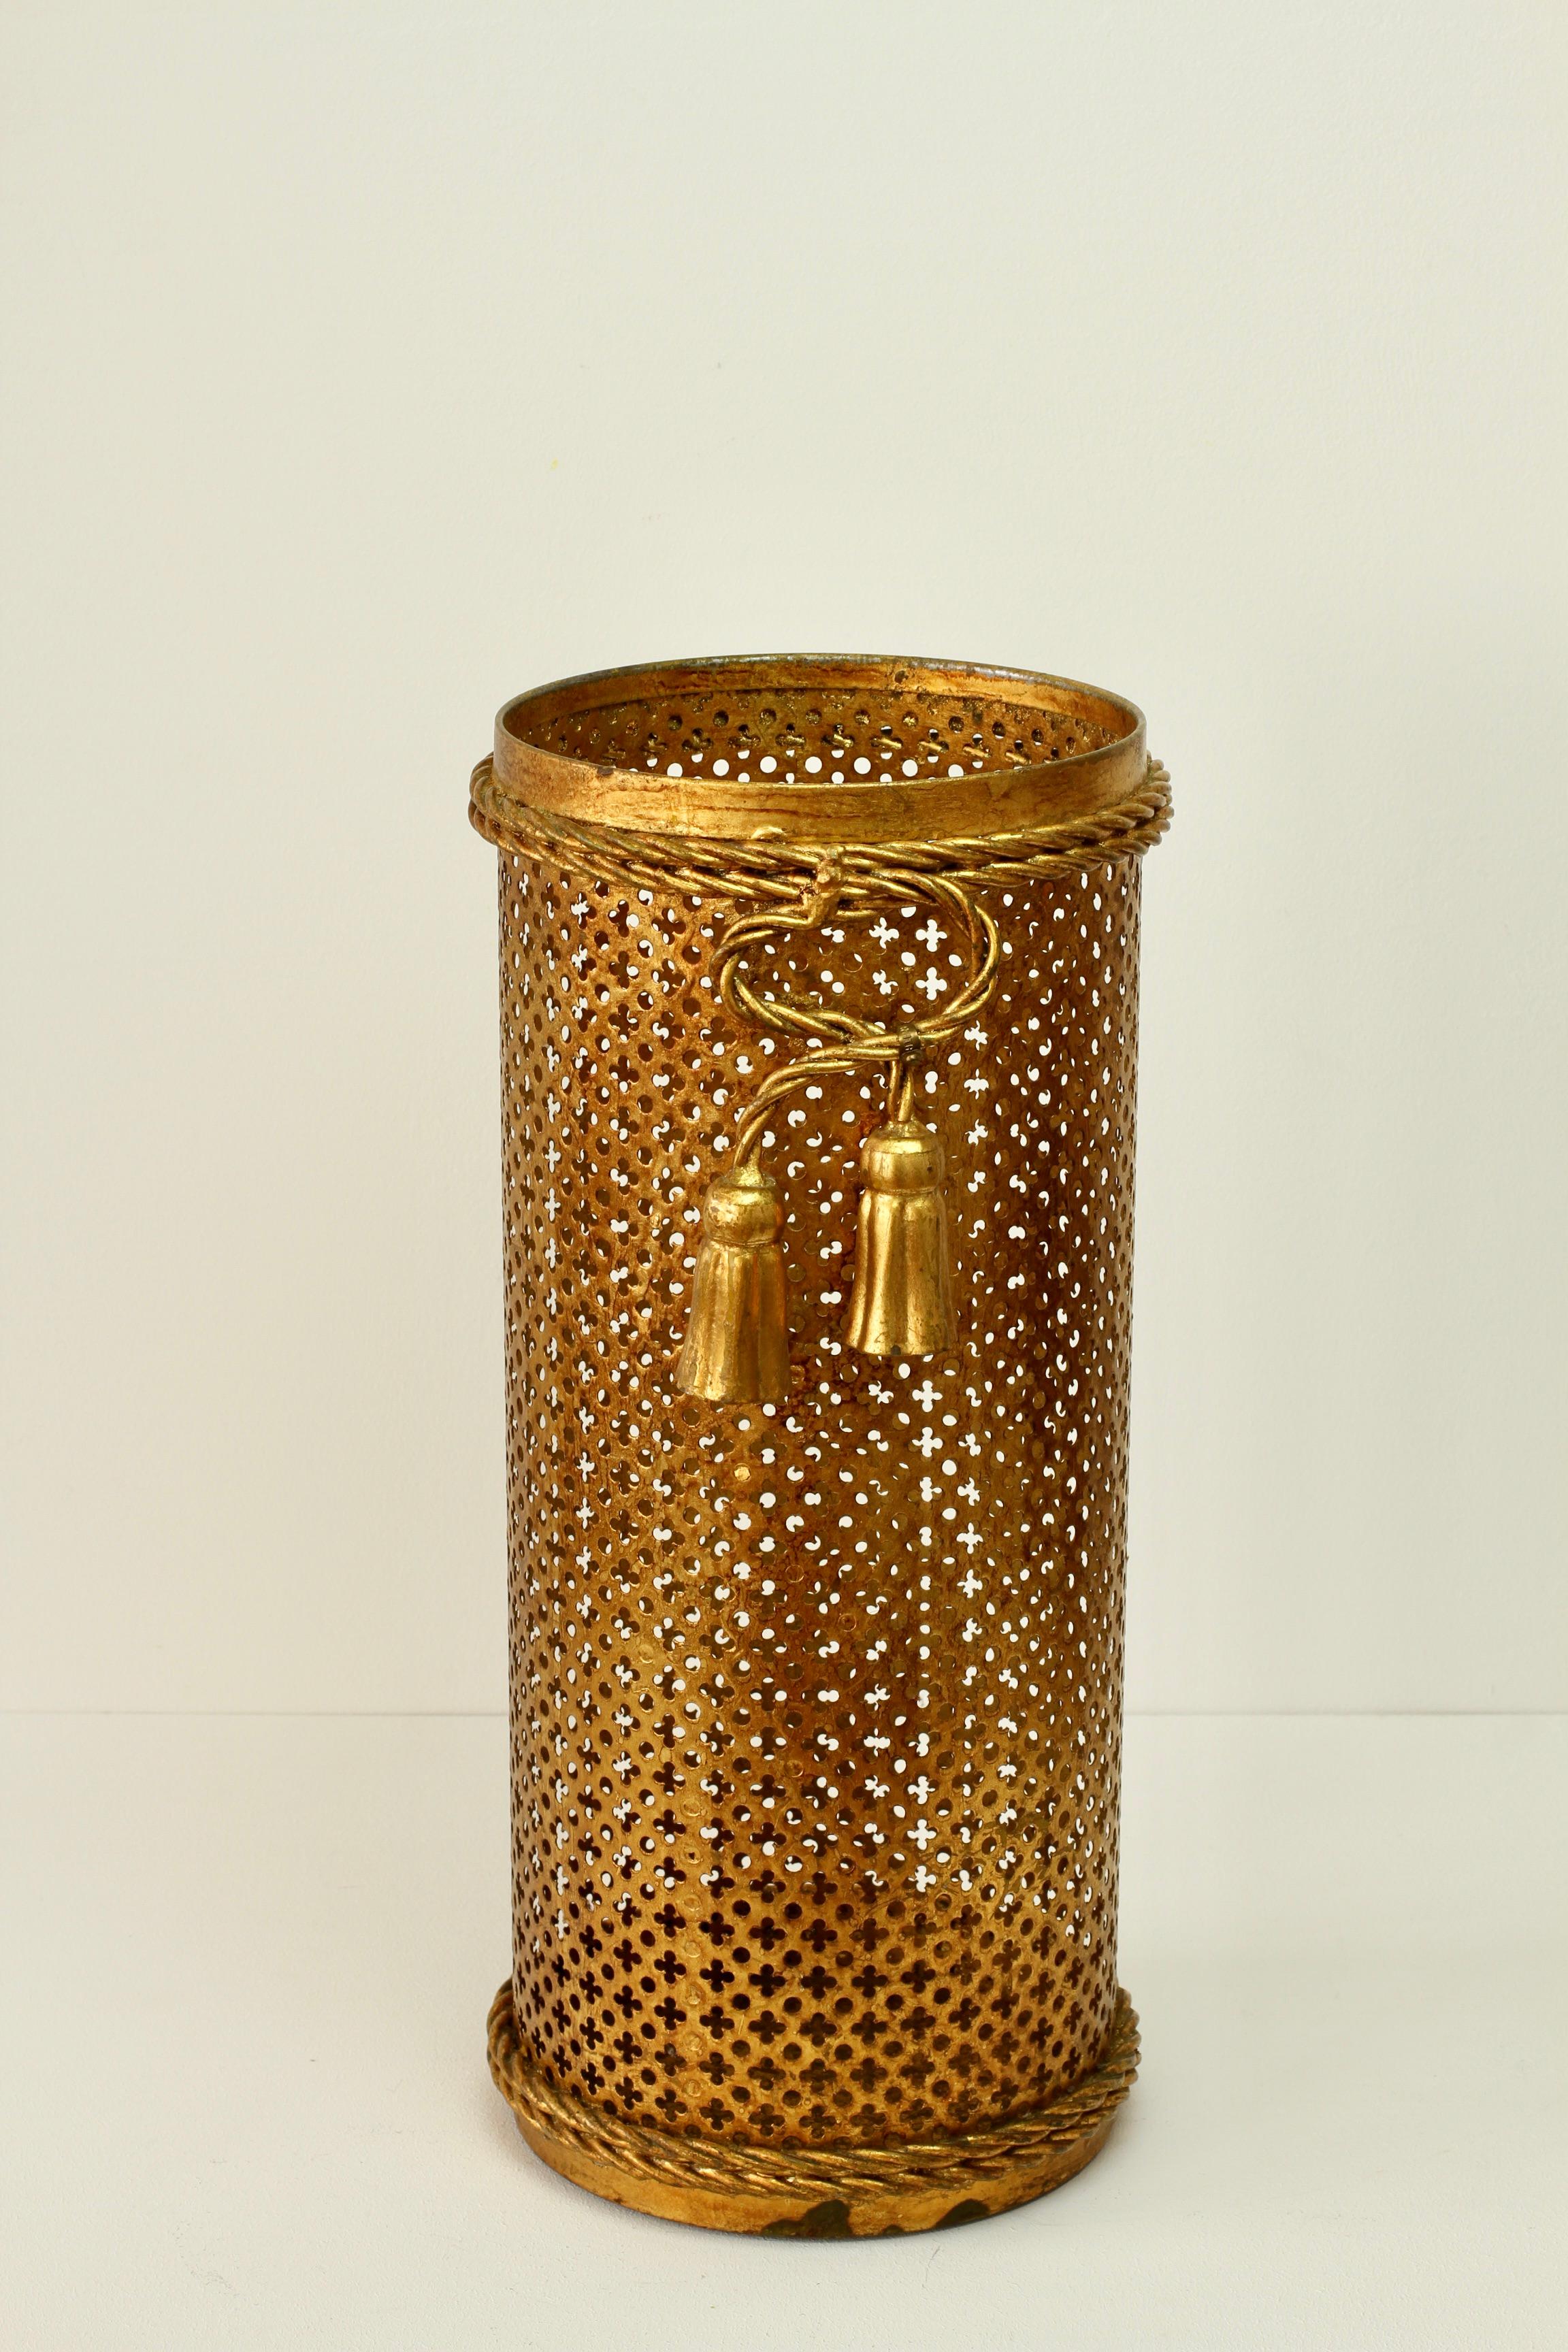 Stunning midcentury gold/gilt/gilded Hollywood Regency style umbrella stand or holder made in Italy, circa 1950. The perforated lattice patterned metalwork with bent rope and tassel details finish the piece perfectly.
 
 A must have for any